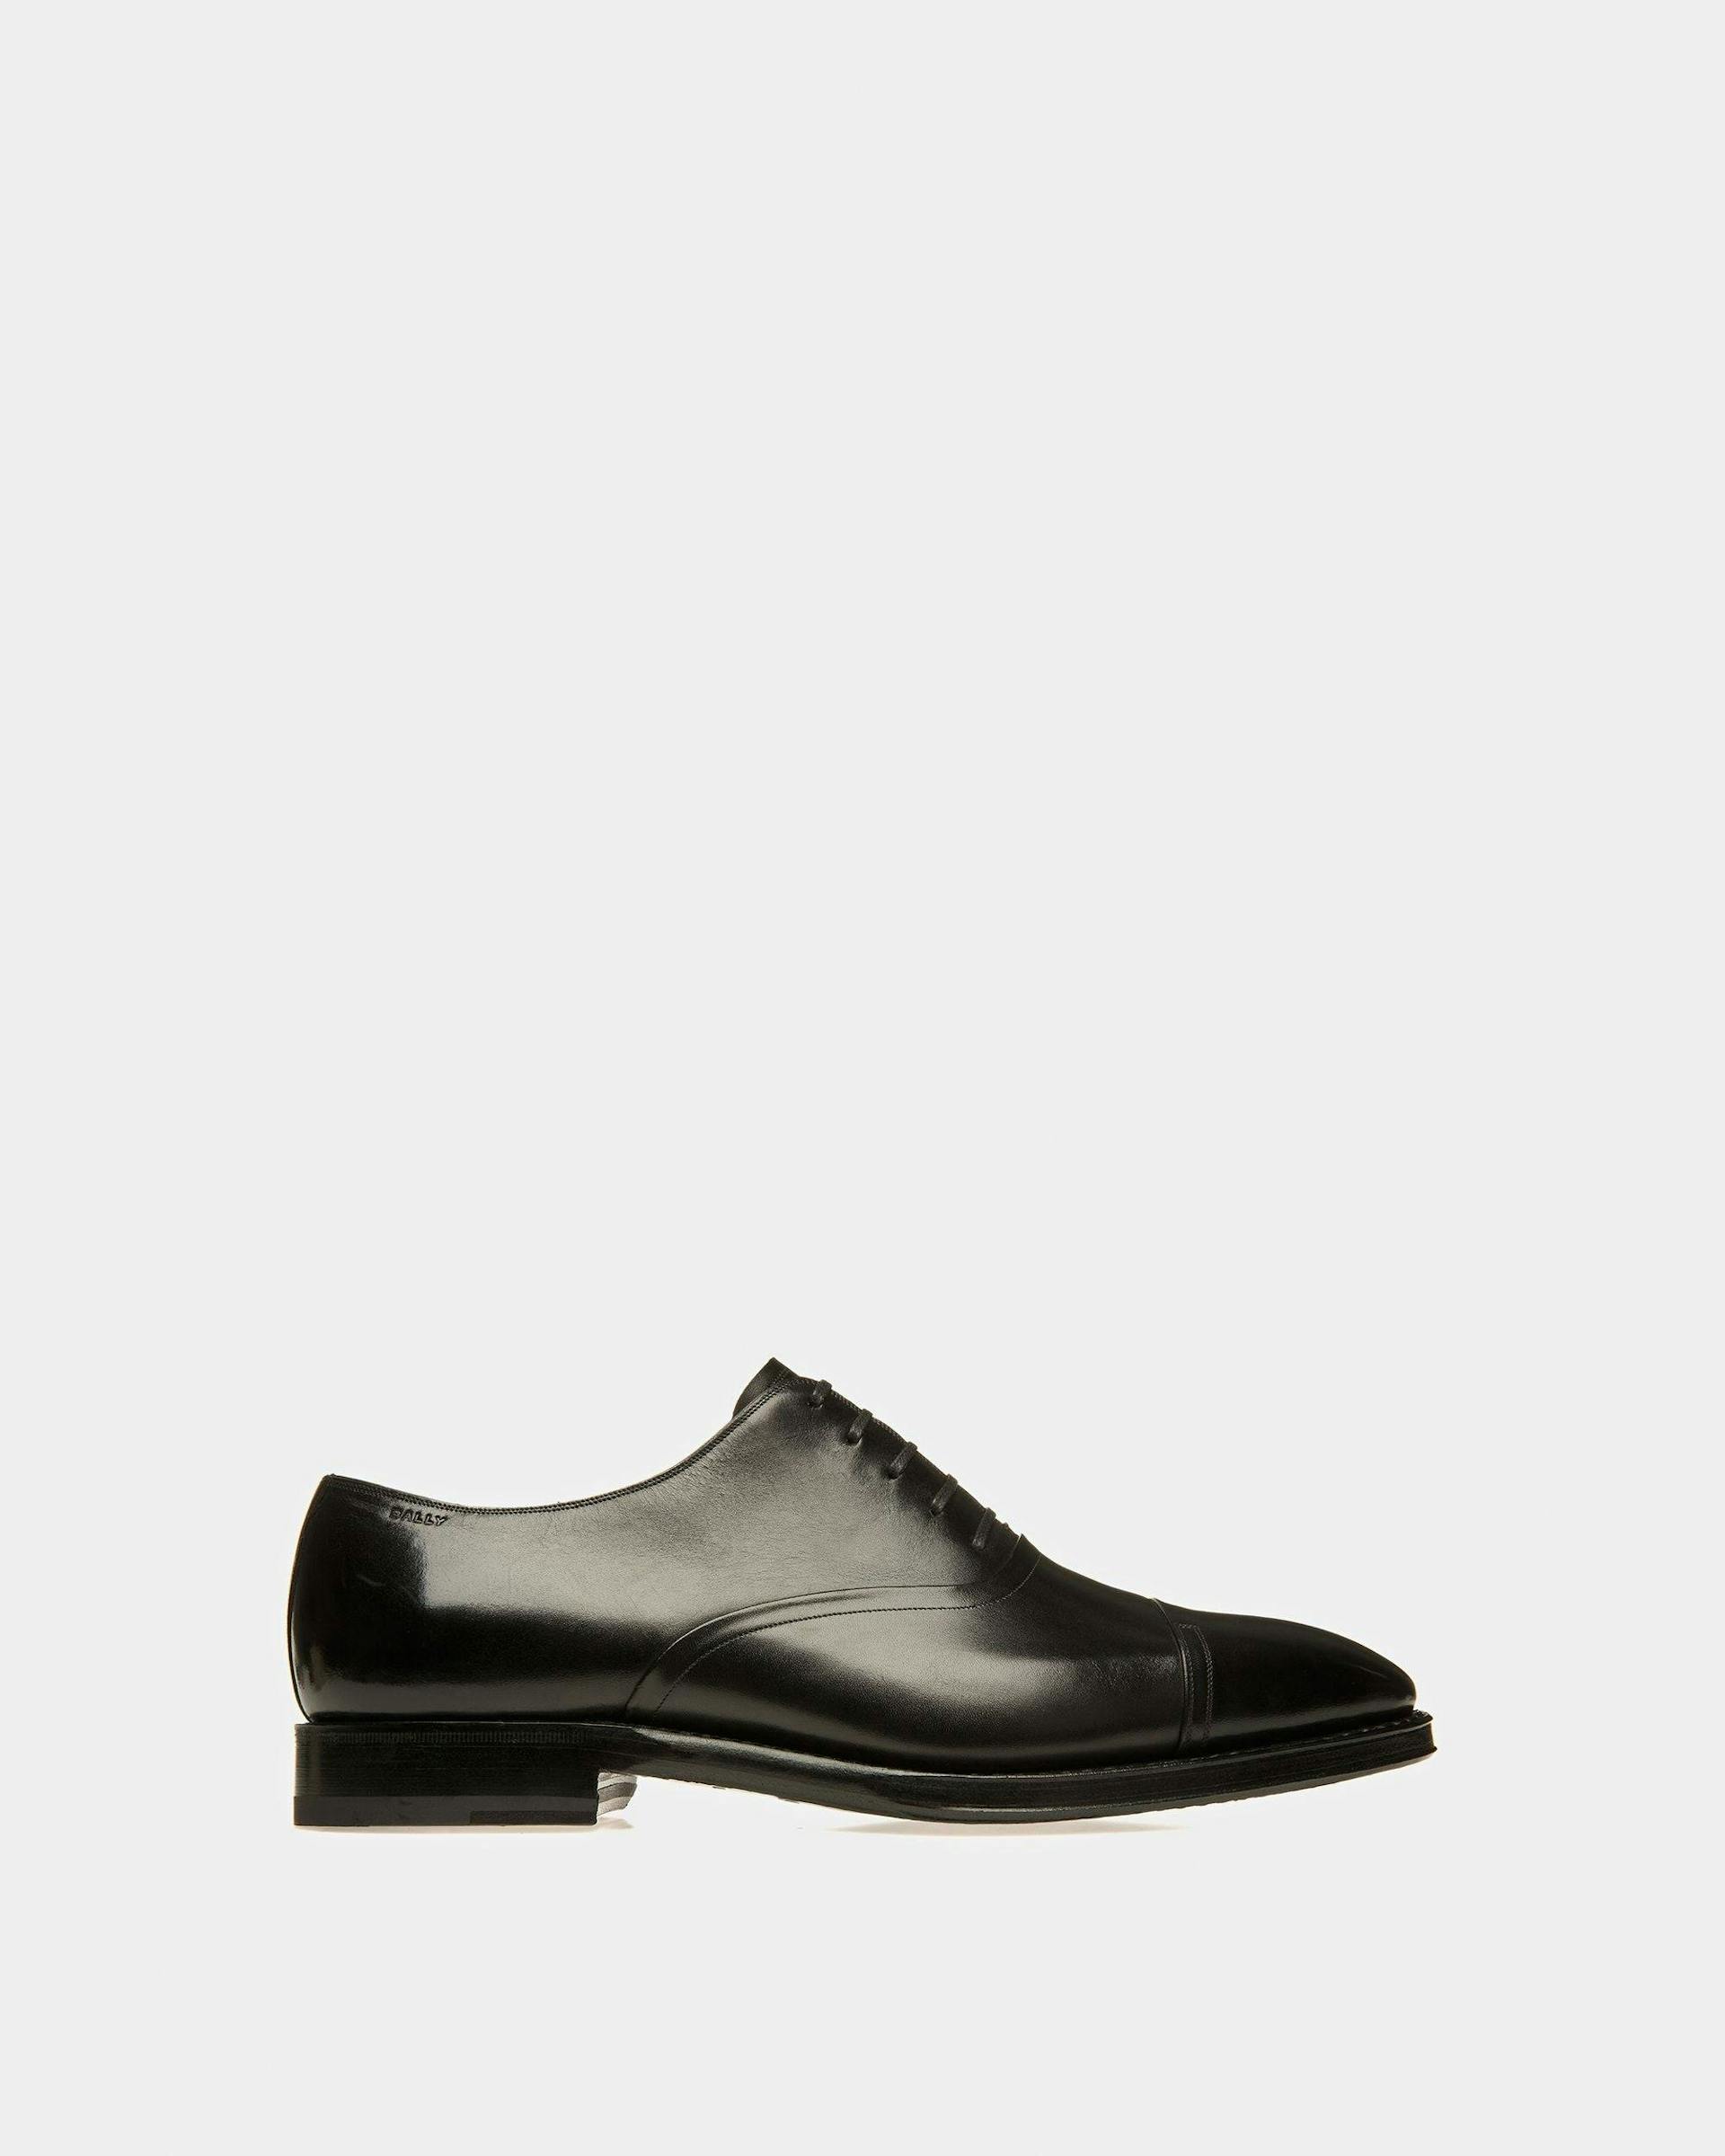 Men's Scribe Oxford Shoes In Black Leather | Bally | Still Life Side